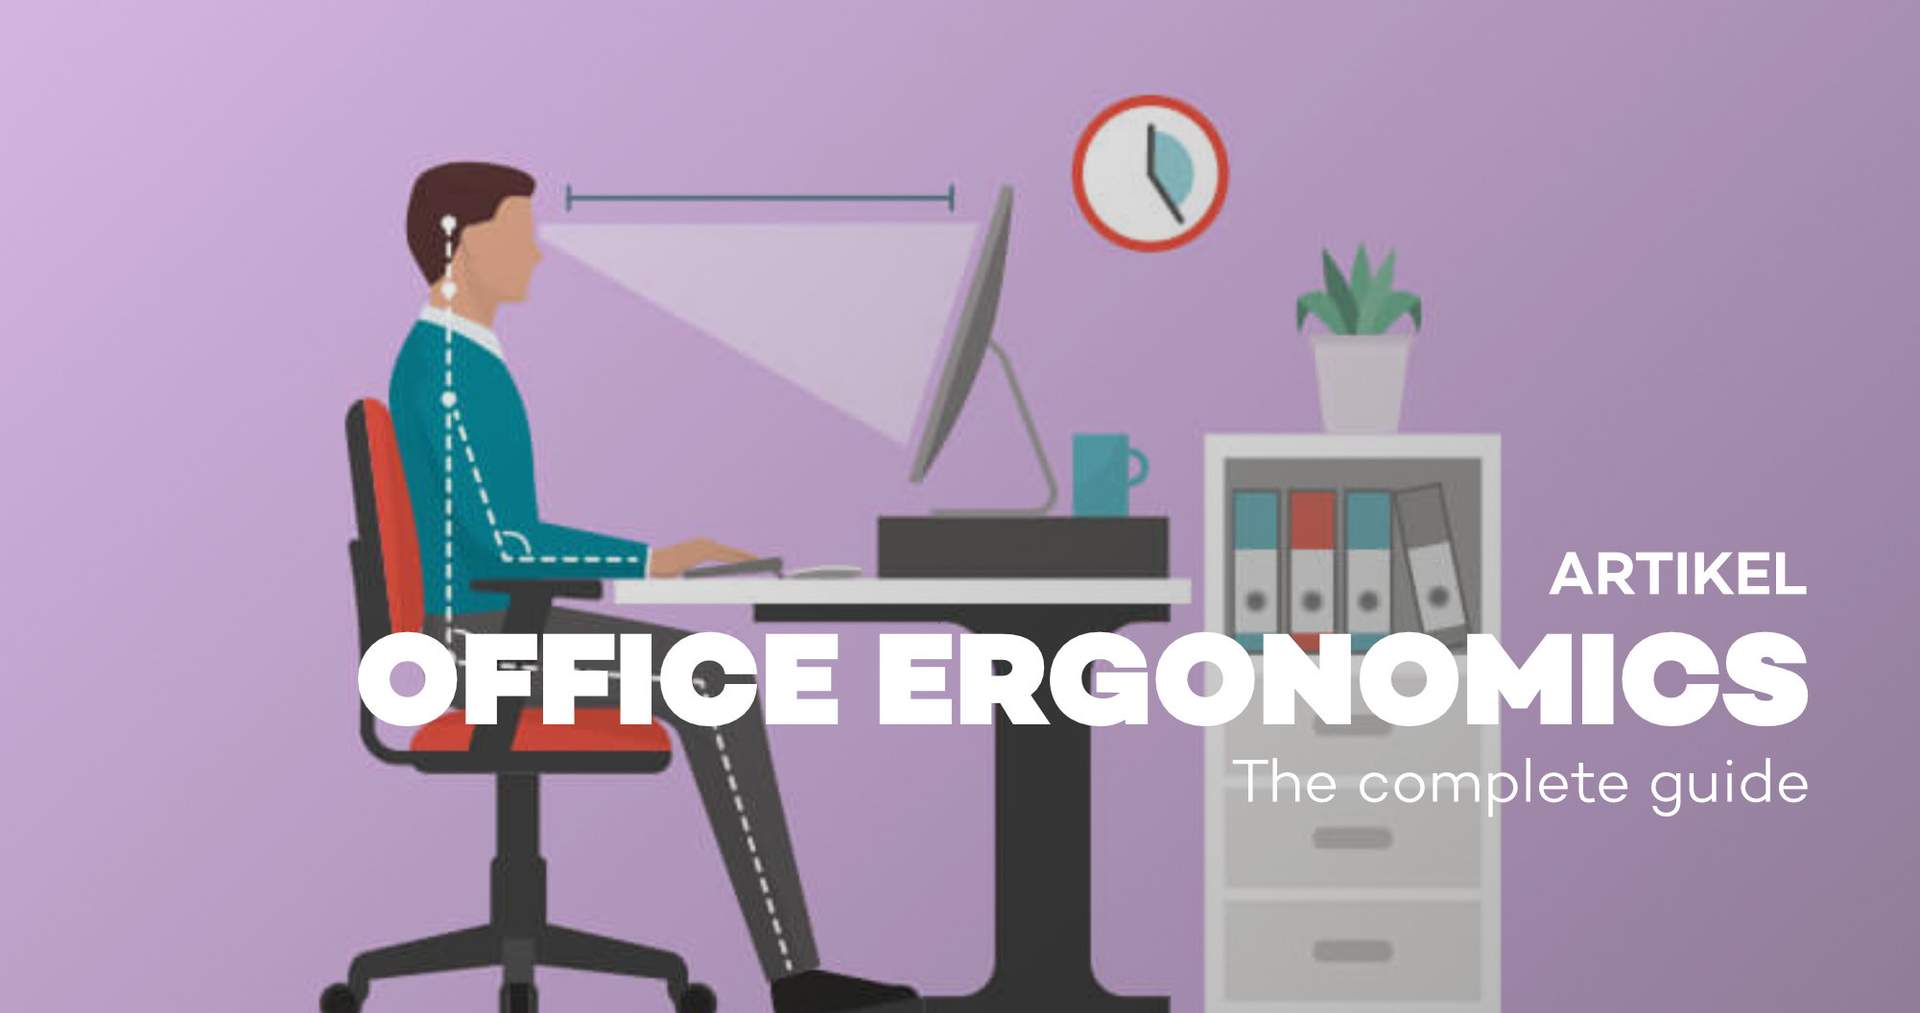 Office ergonomics - The complete guide